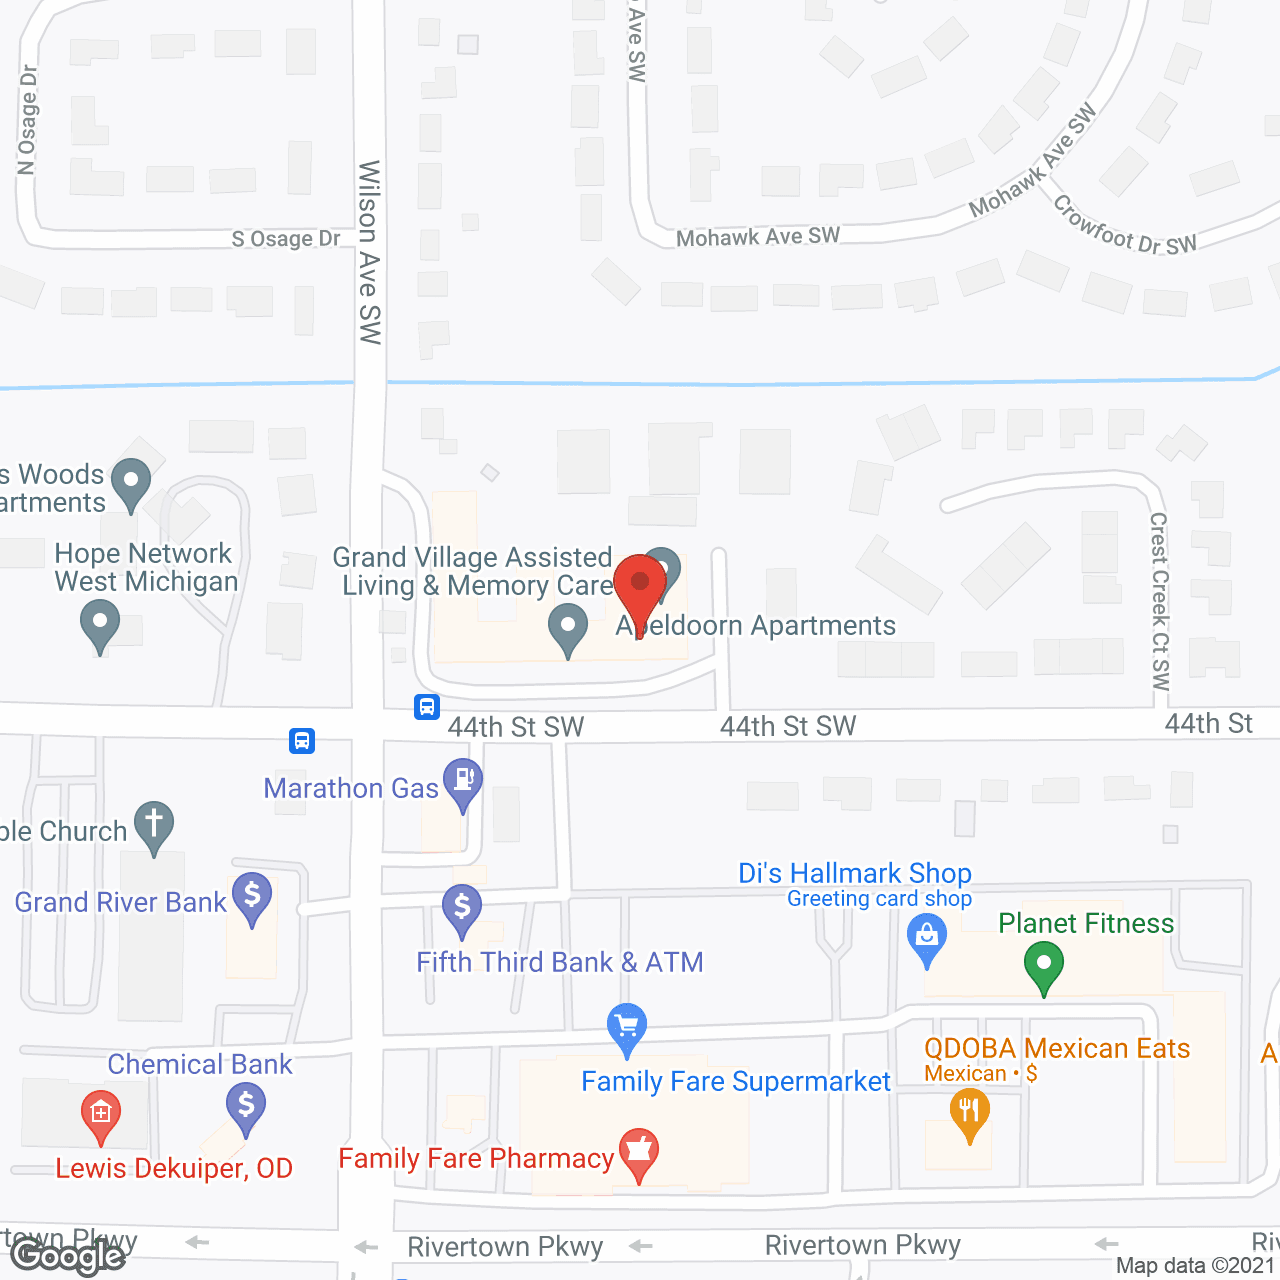 Grand Village Assisted Living and Memory Care in google map